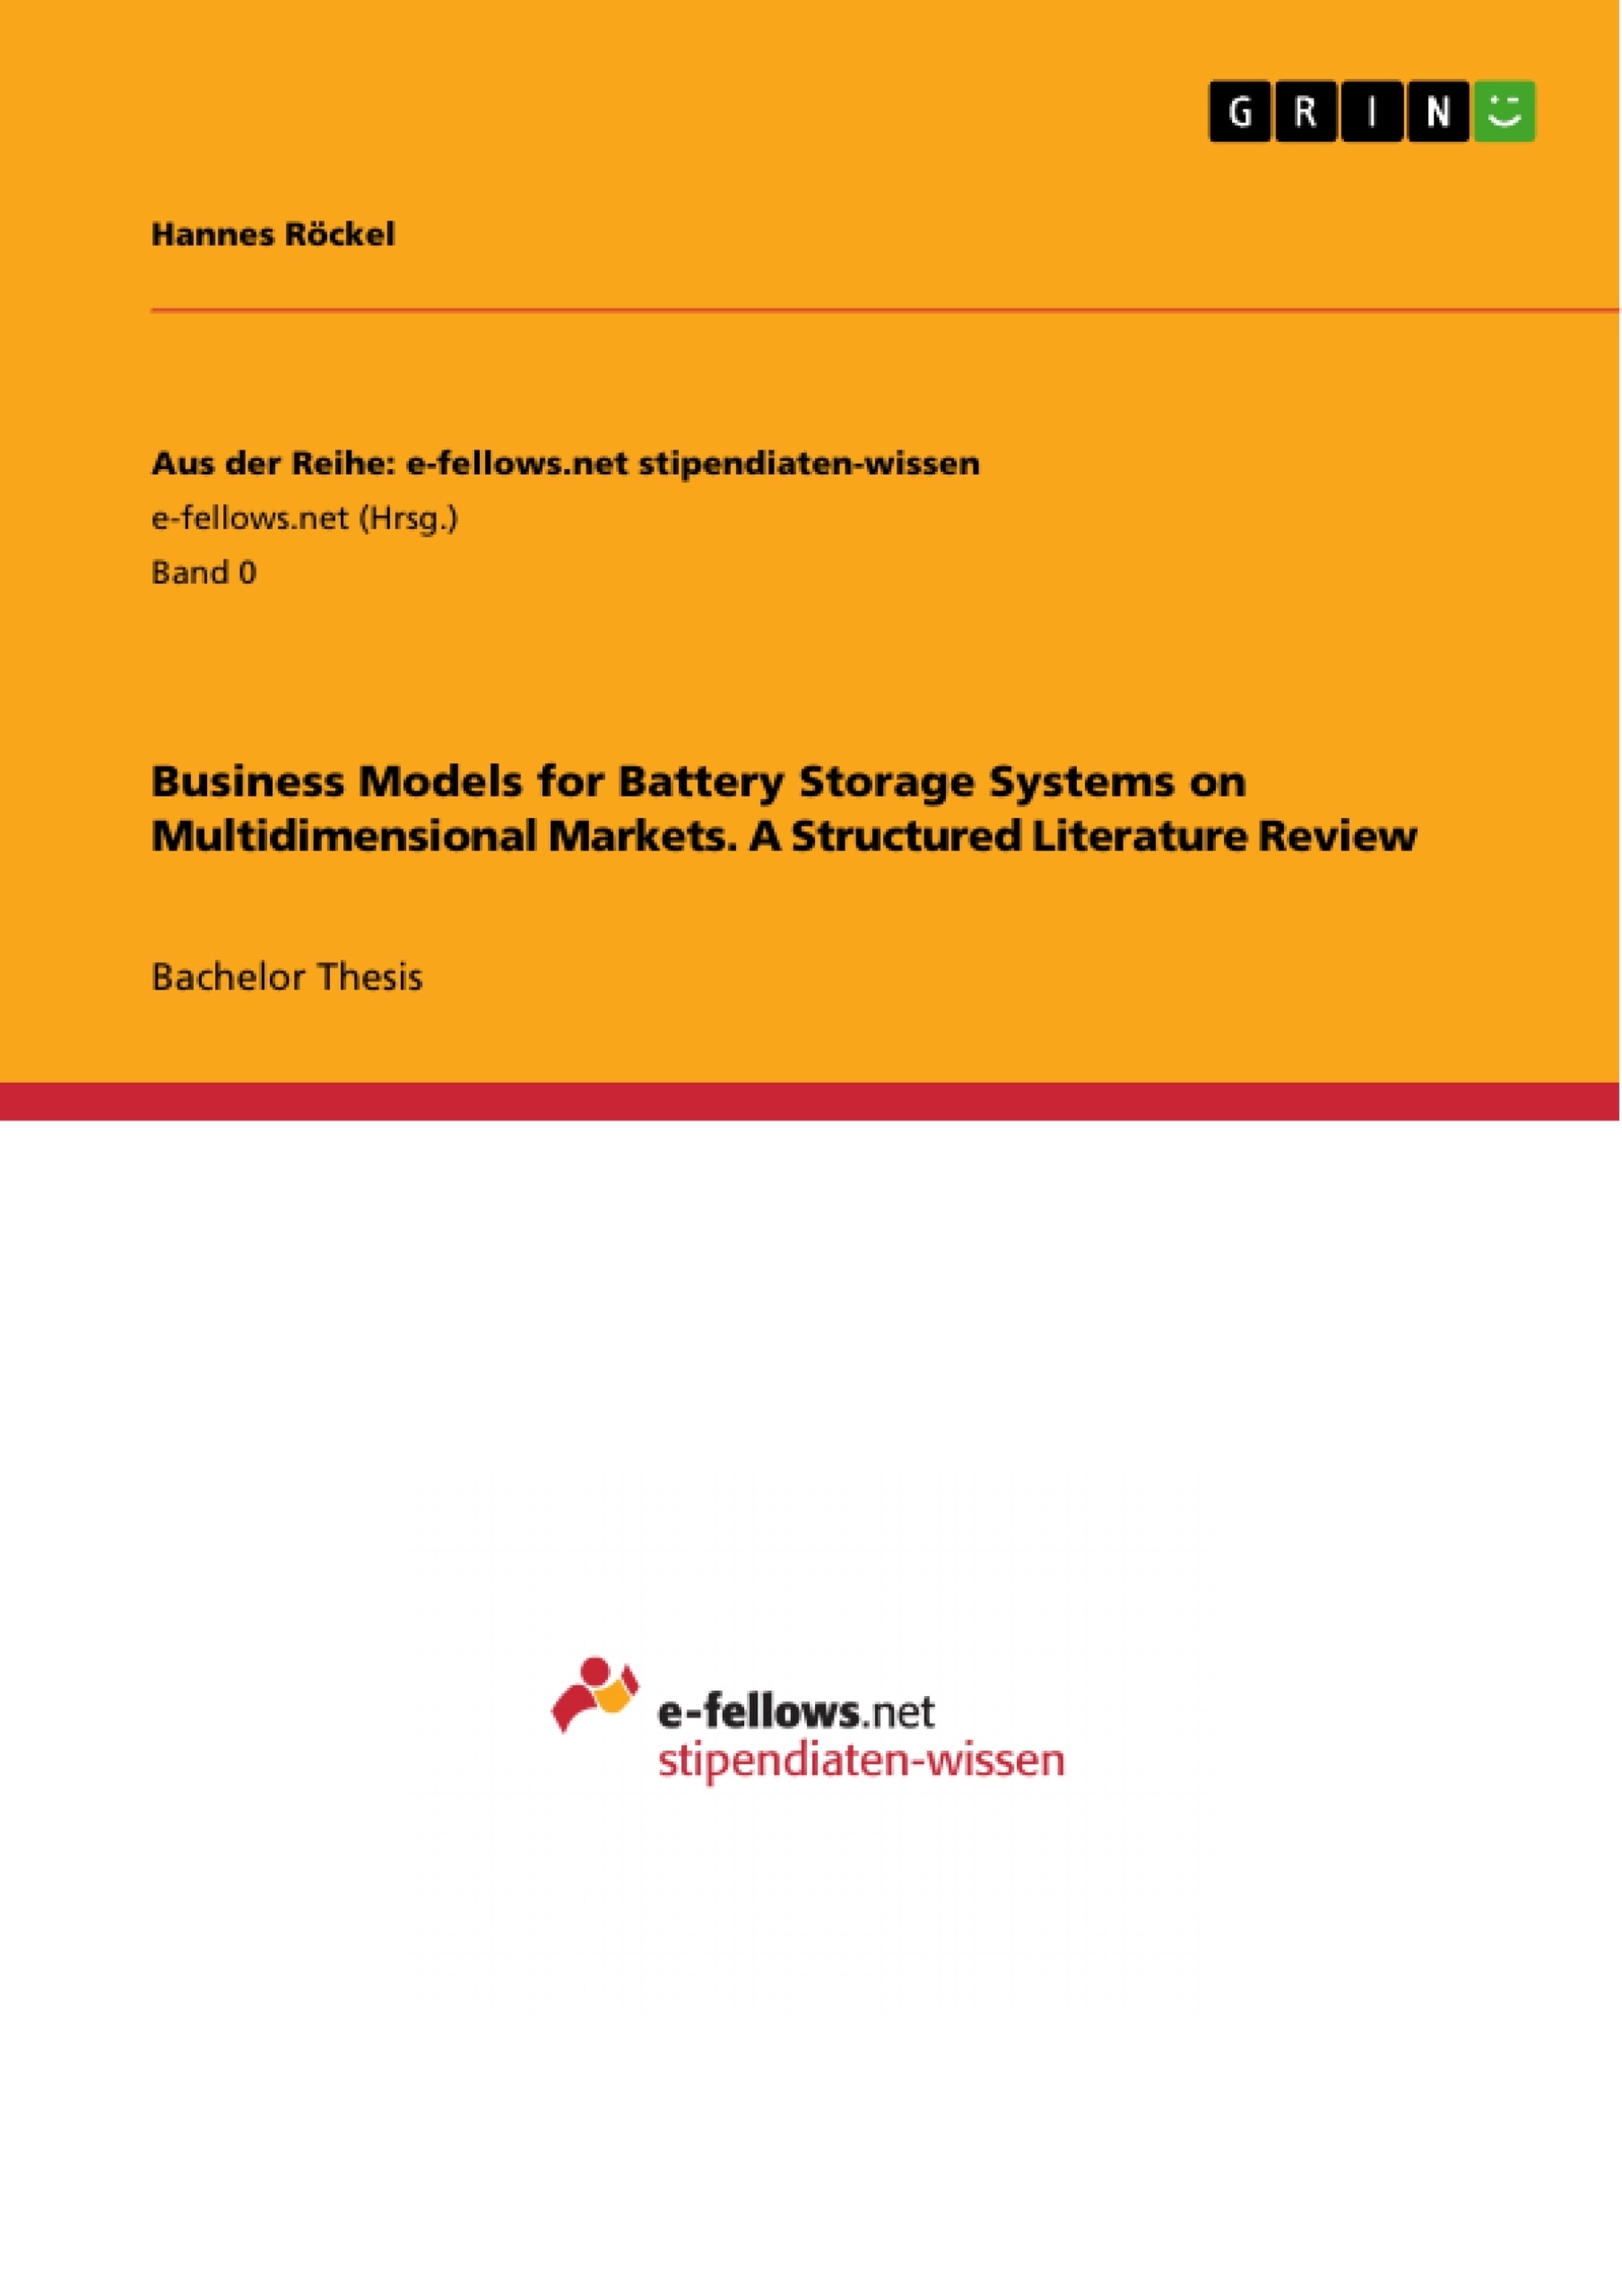 Title: Business Models for Battery Storage Systems on Multidimensional Markets. A Structured Literature Review